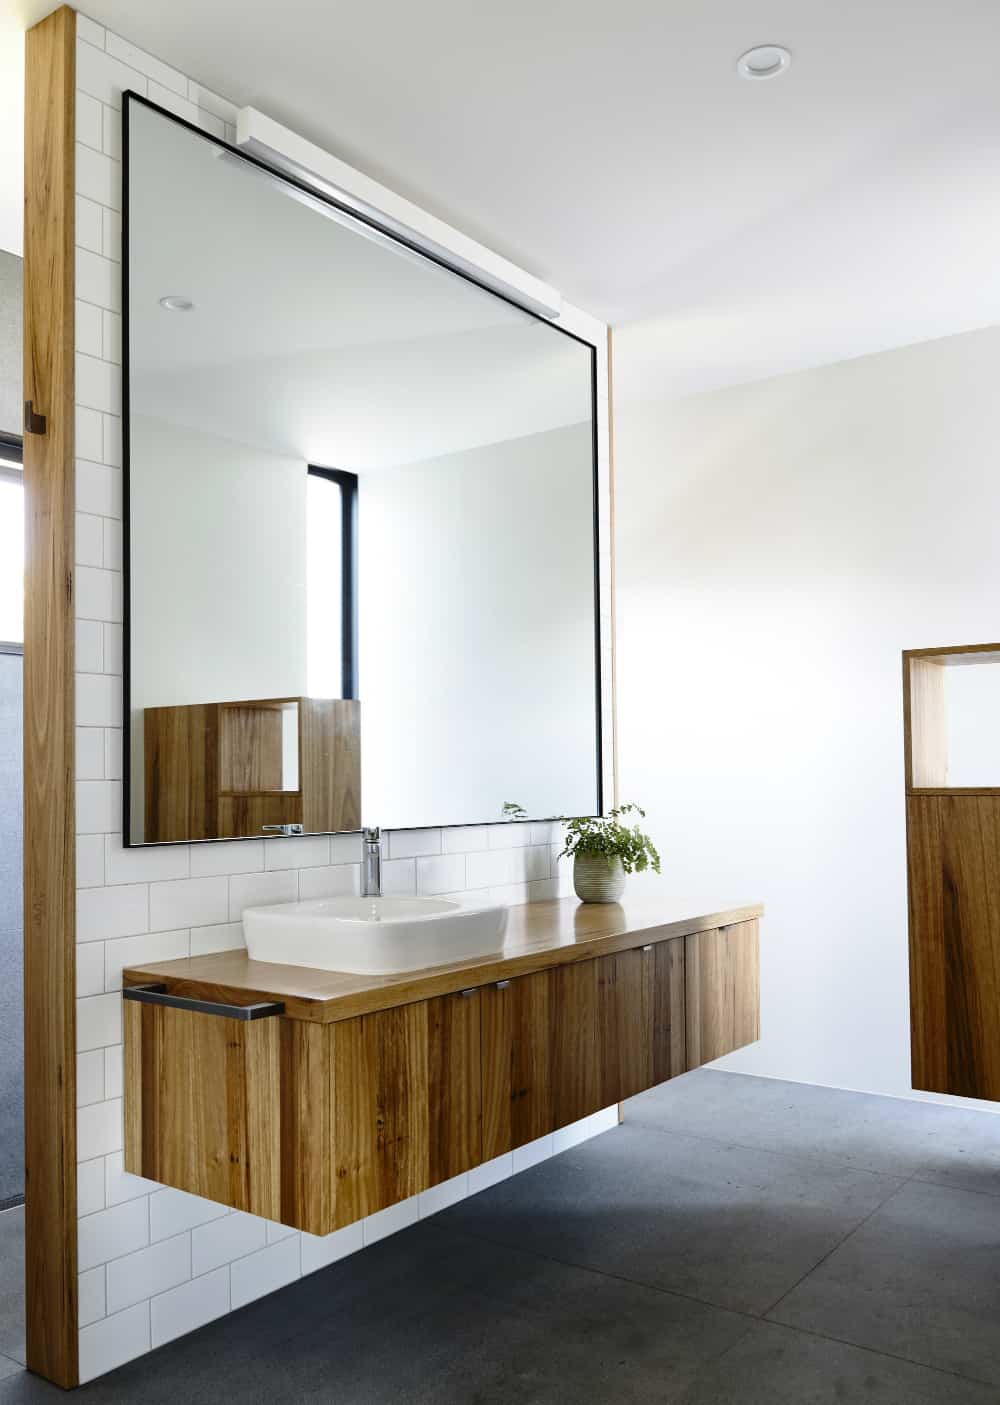 Bathroom vanity made of same wood as the kitchen